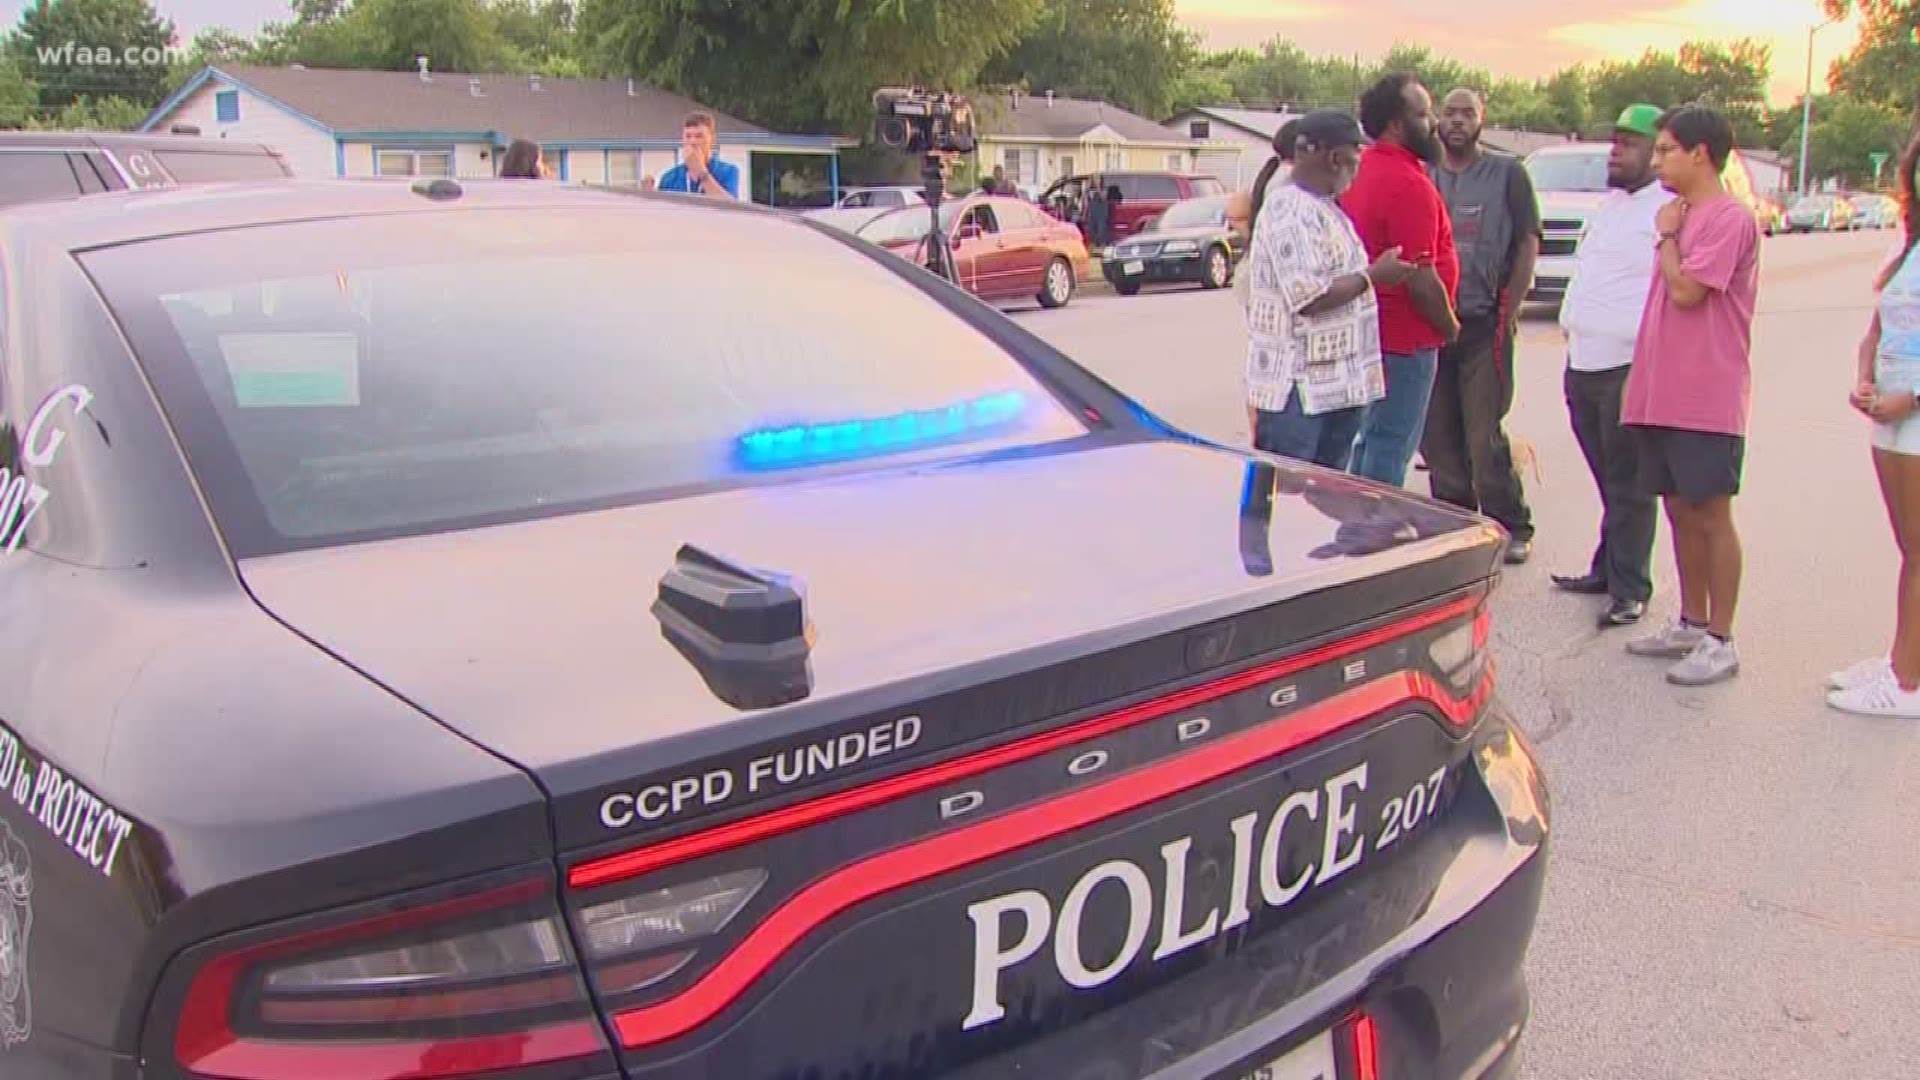 Community activists are demanding police release body-camera footage of the latest fatal police shooting.